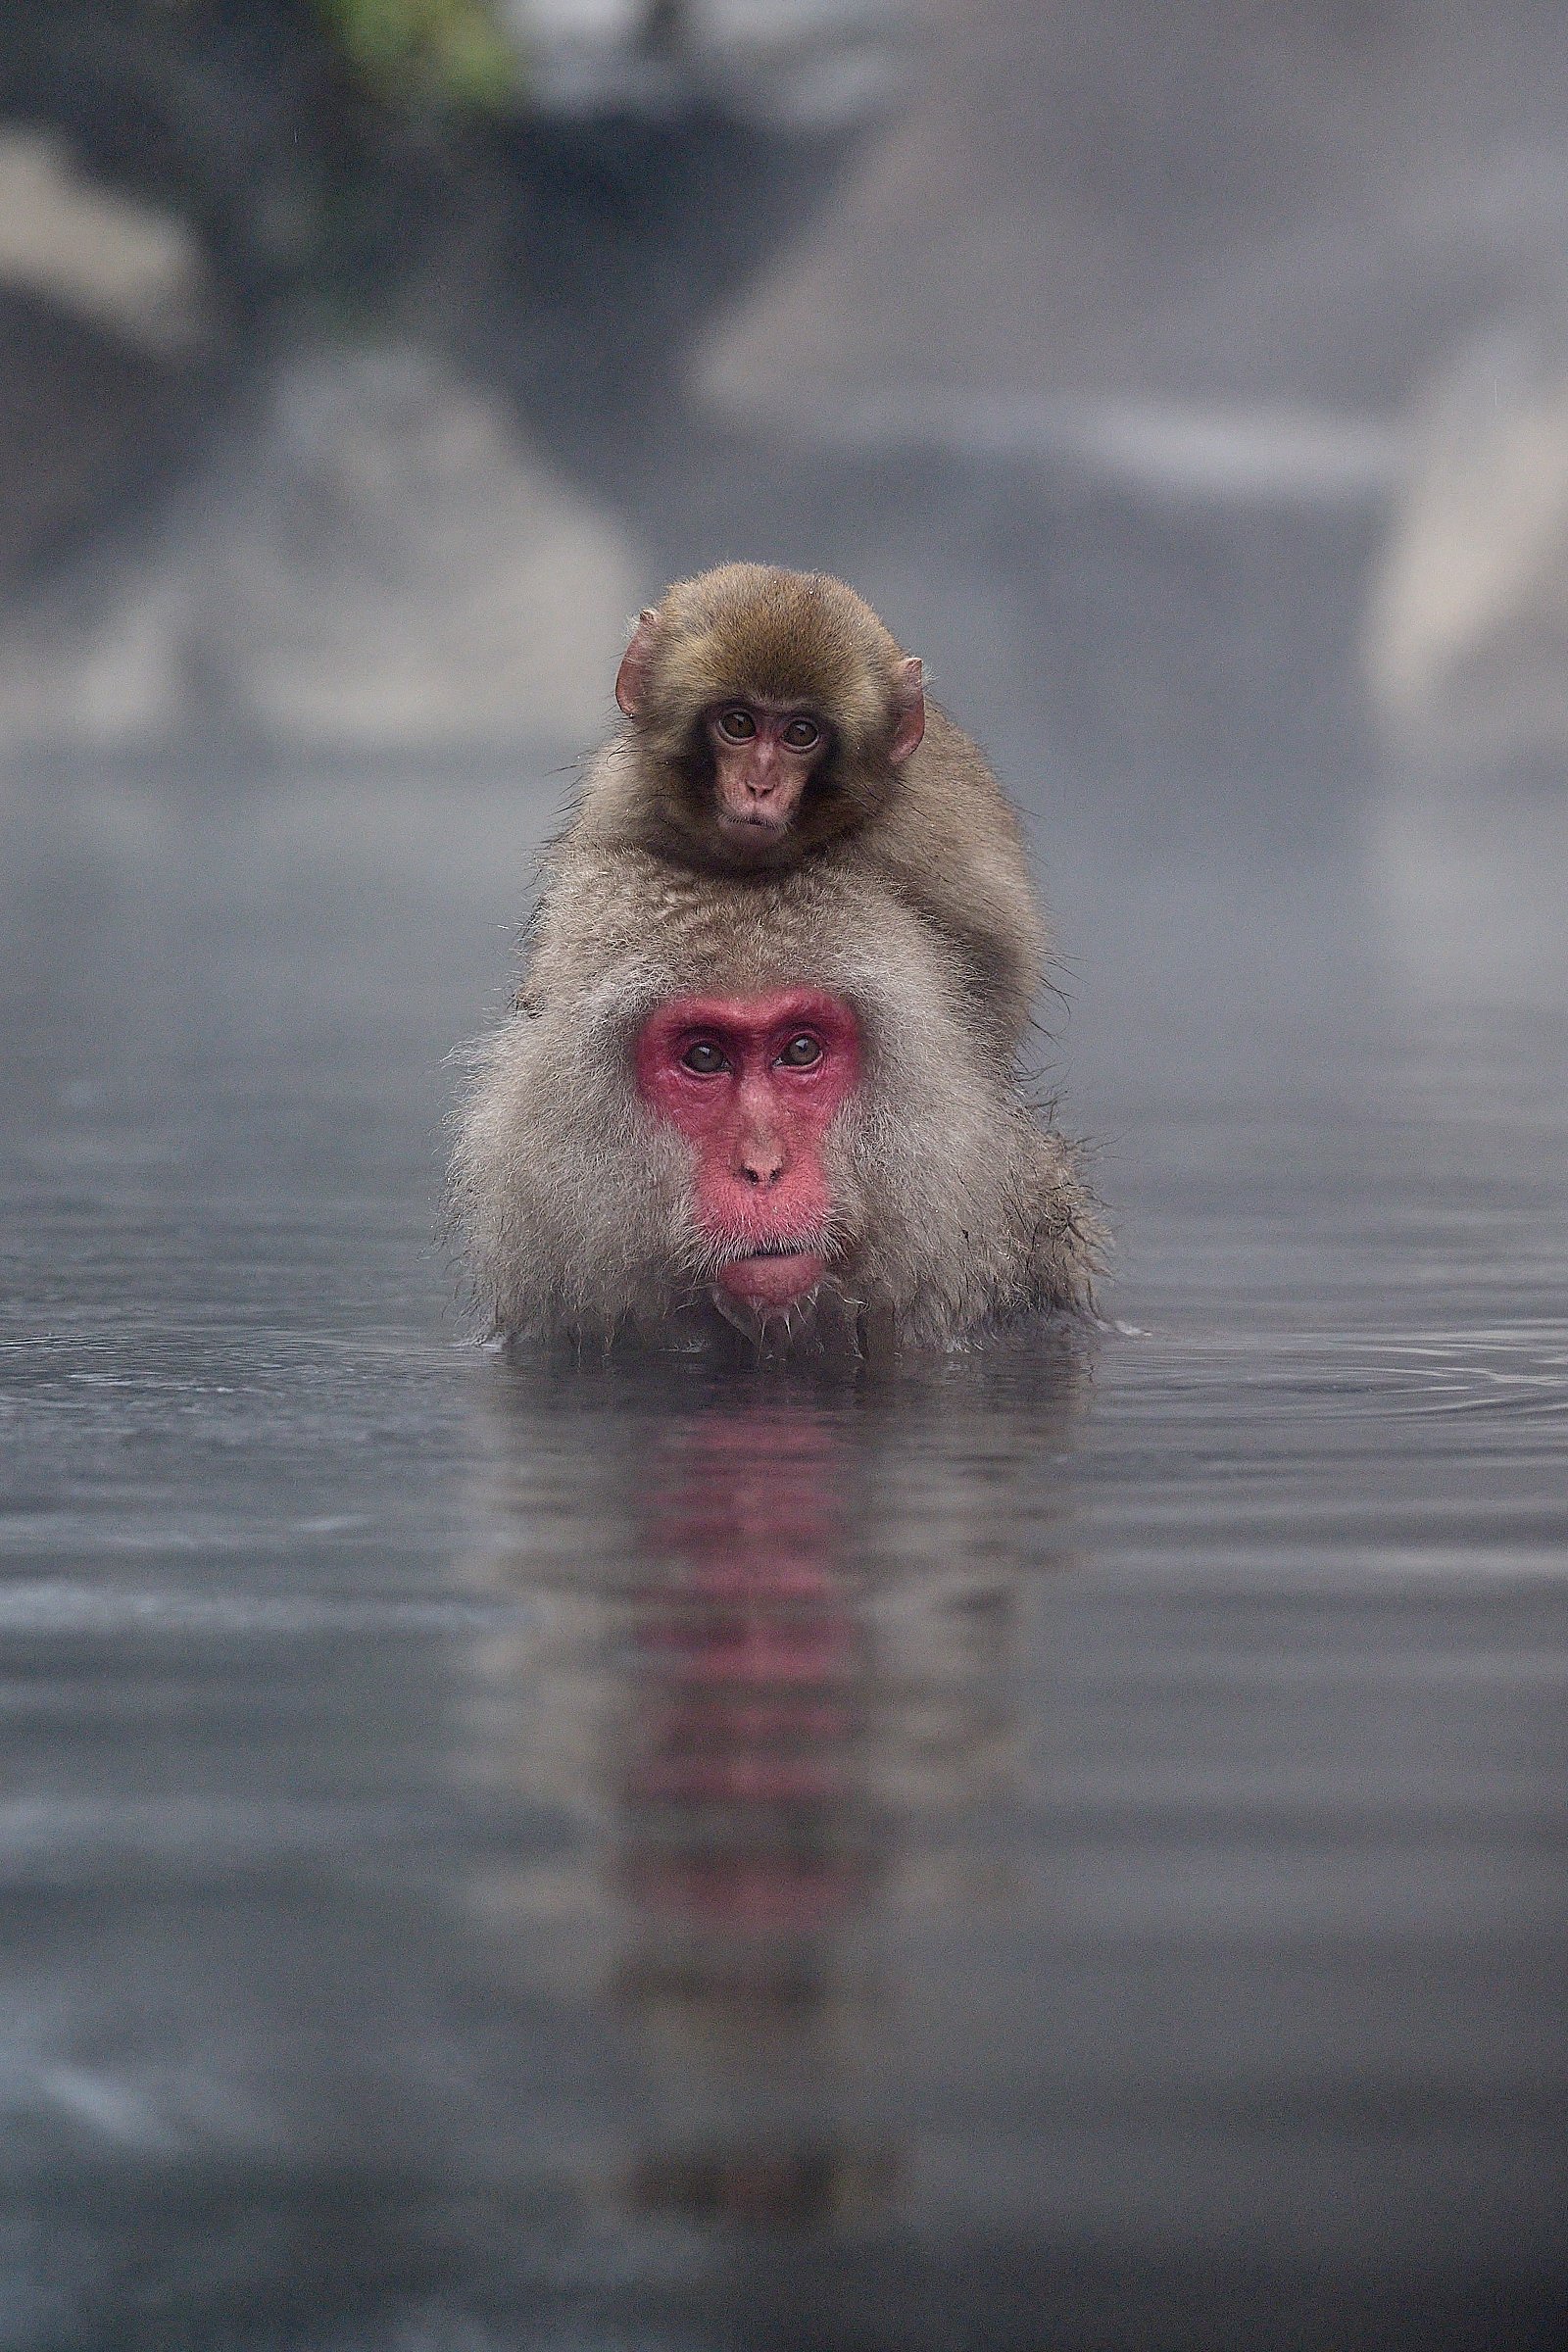 Japanese snow monkeys congregate in the heated water pools to combat the freezing cold outside